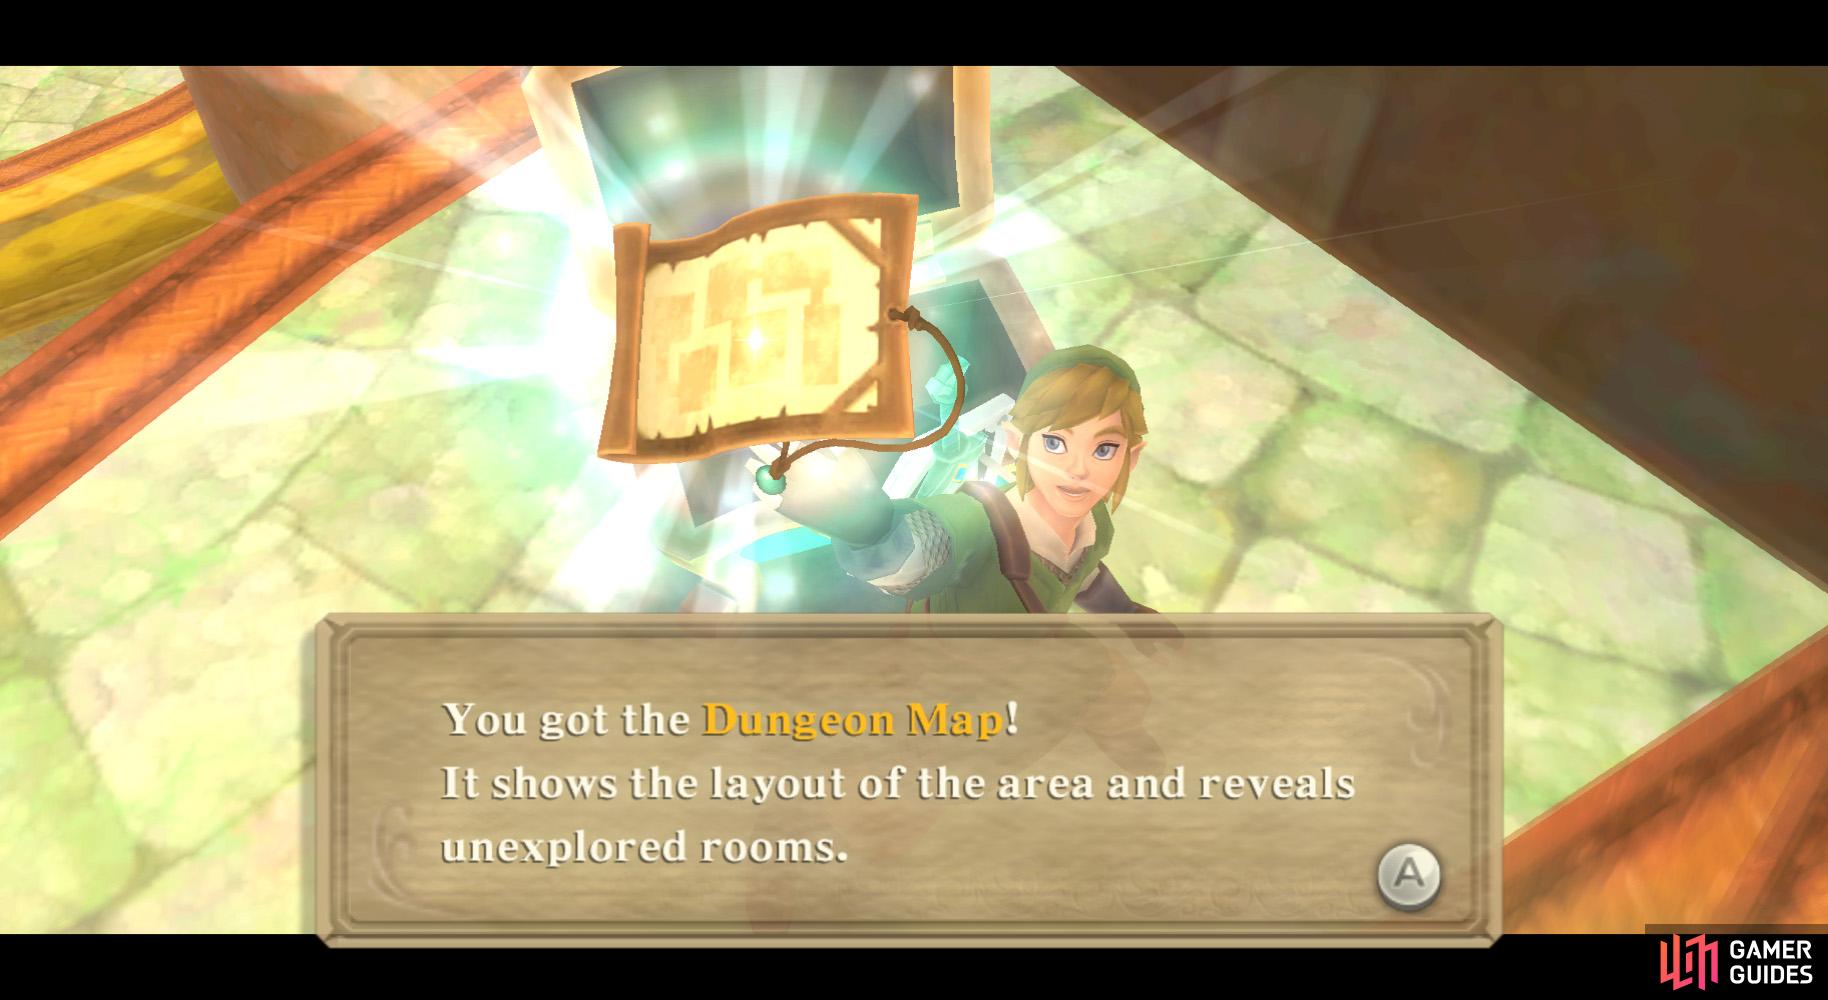 With the Dungeon Map, youll have an easier time navigating.